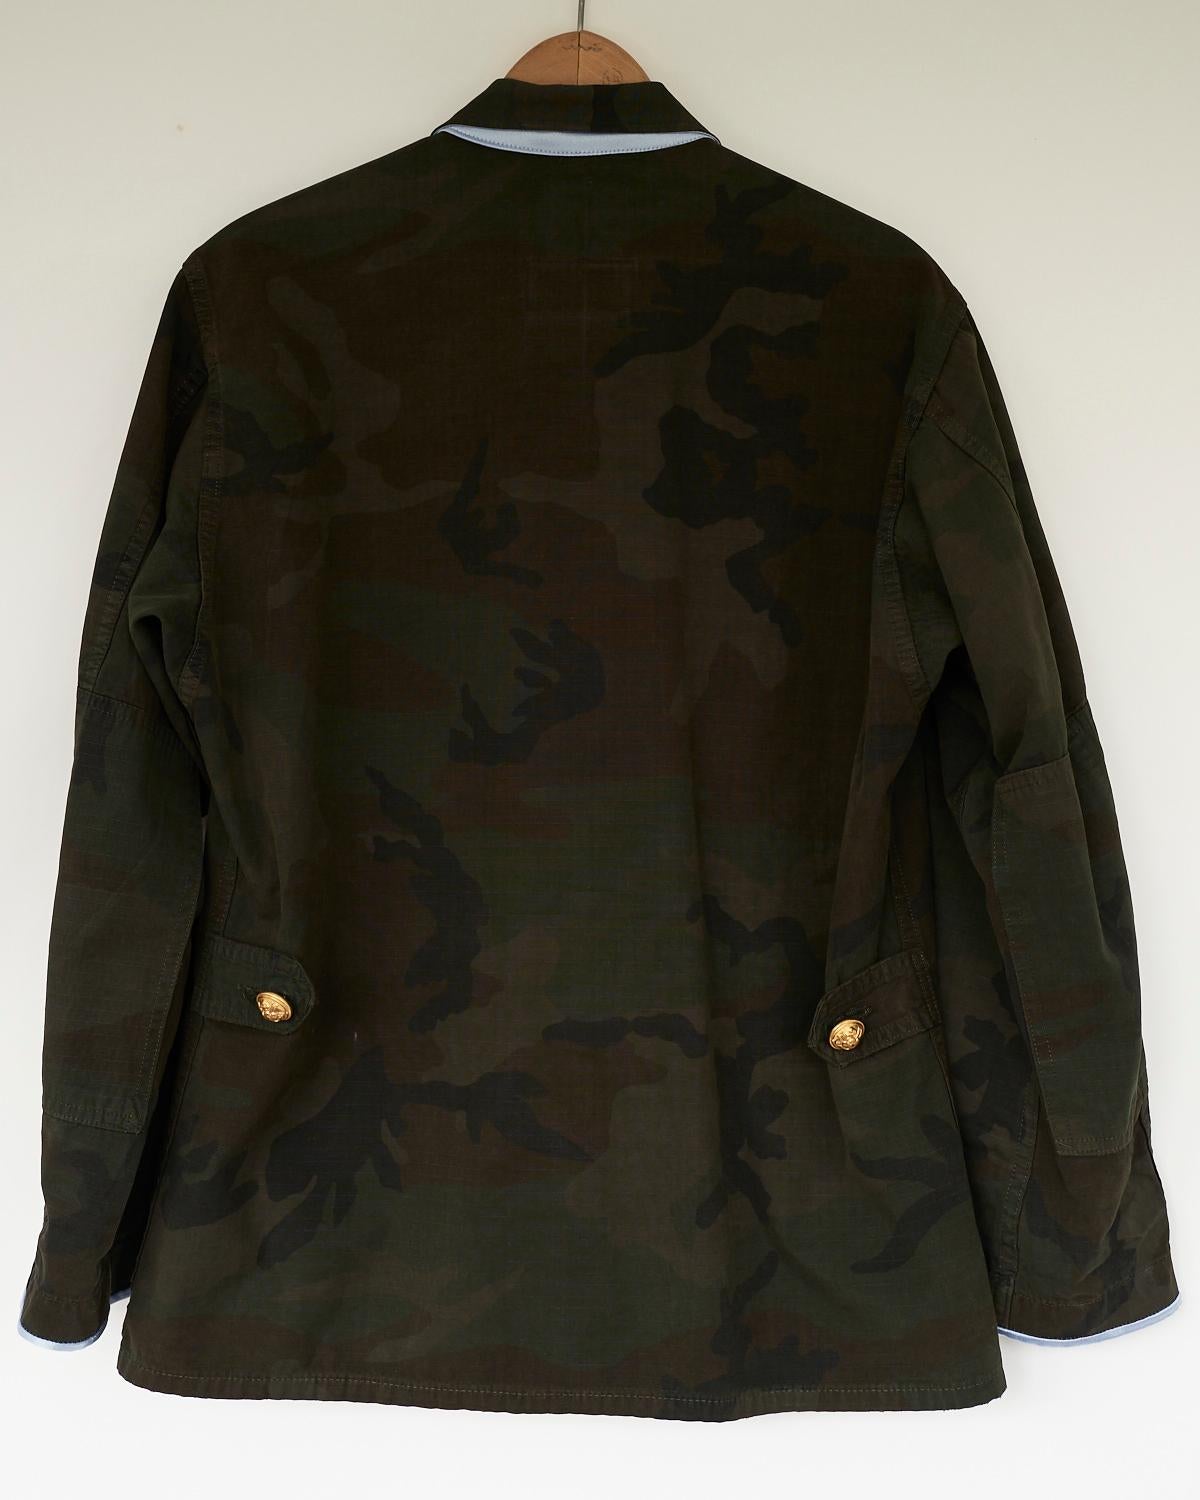 Embellished Camouflage aJacket Military Gold Button Green Blue Silk J Dauphin 2